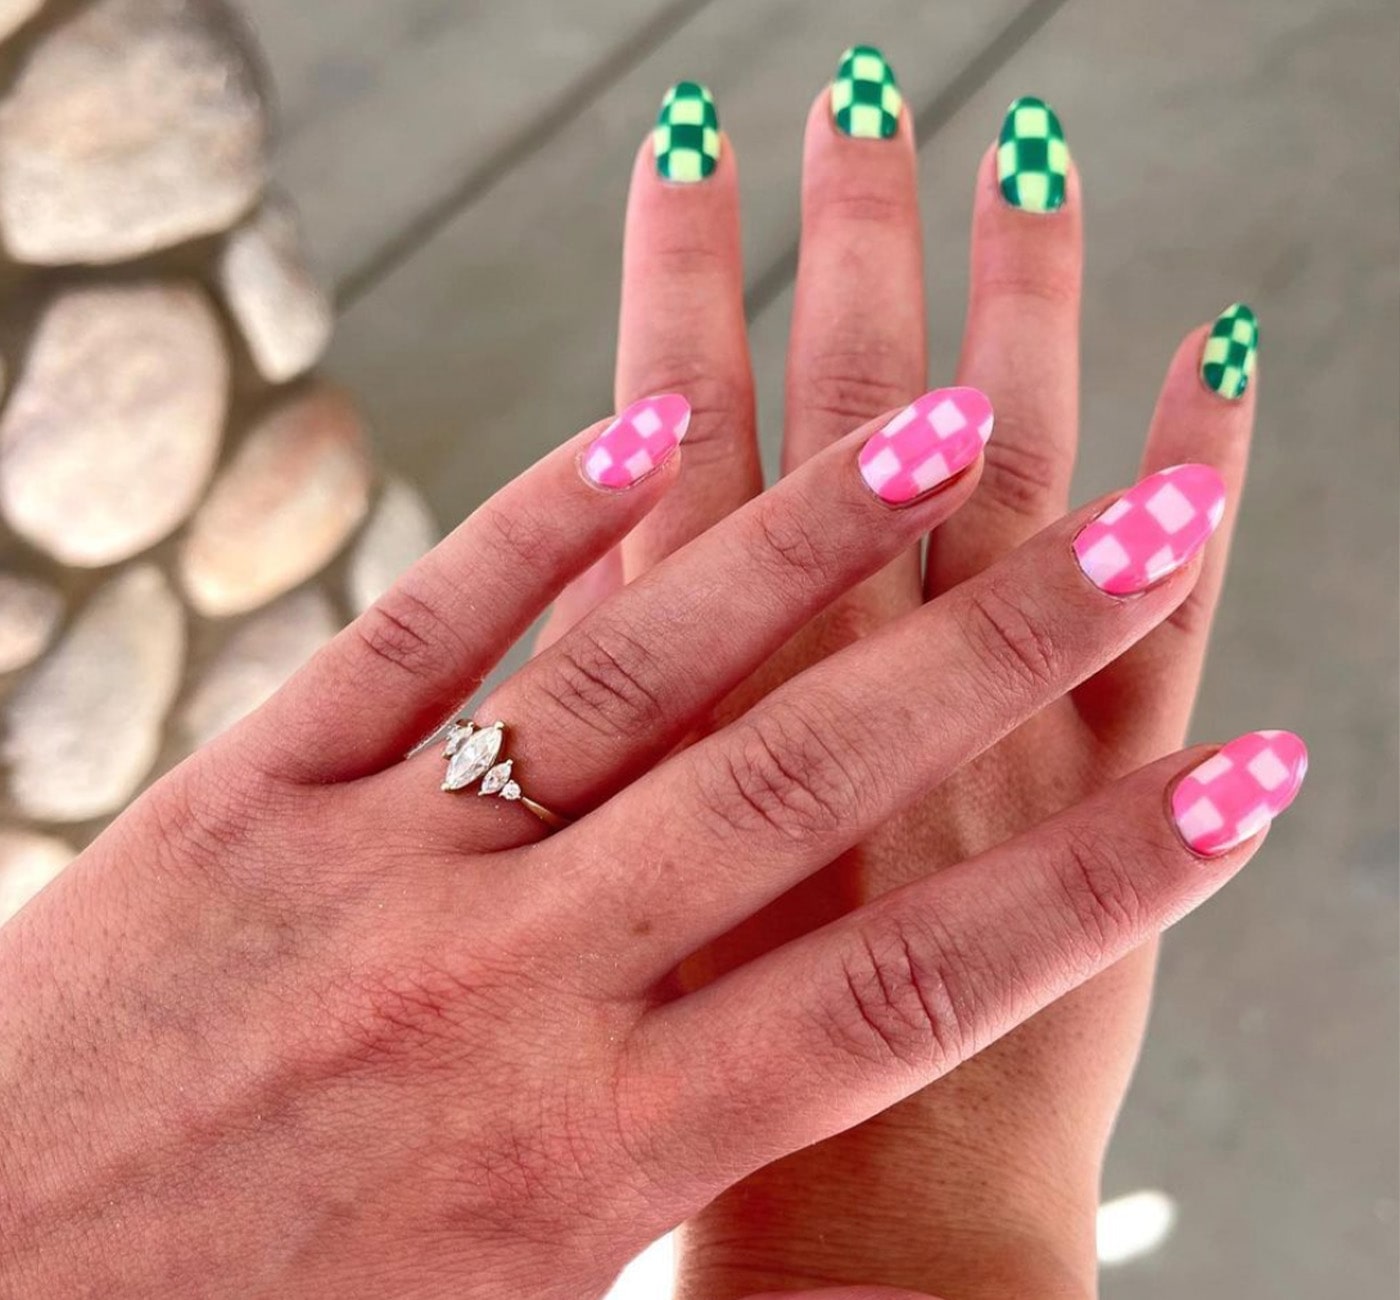 Nails in a checkered pattern. One hand is two tone pink and the other is two tone green.